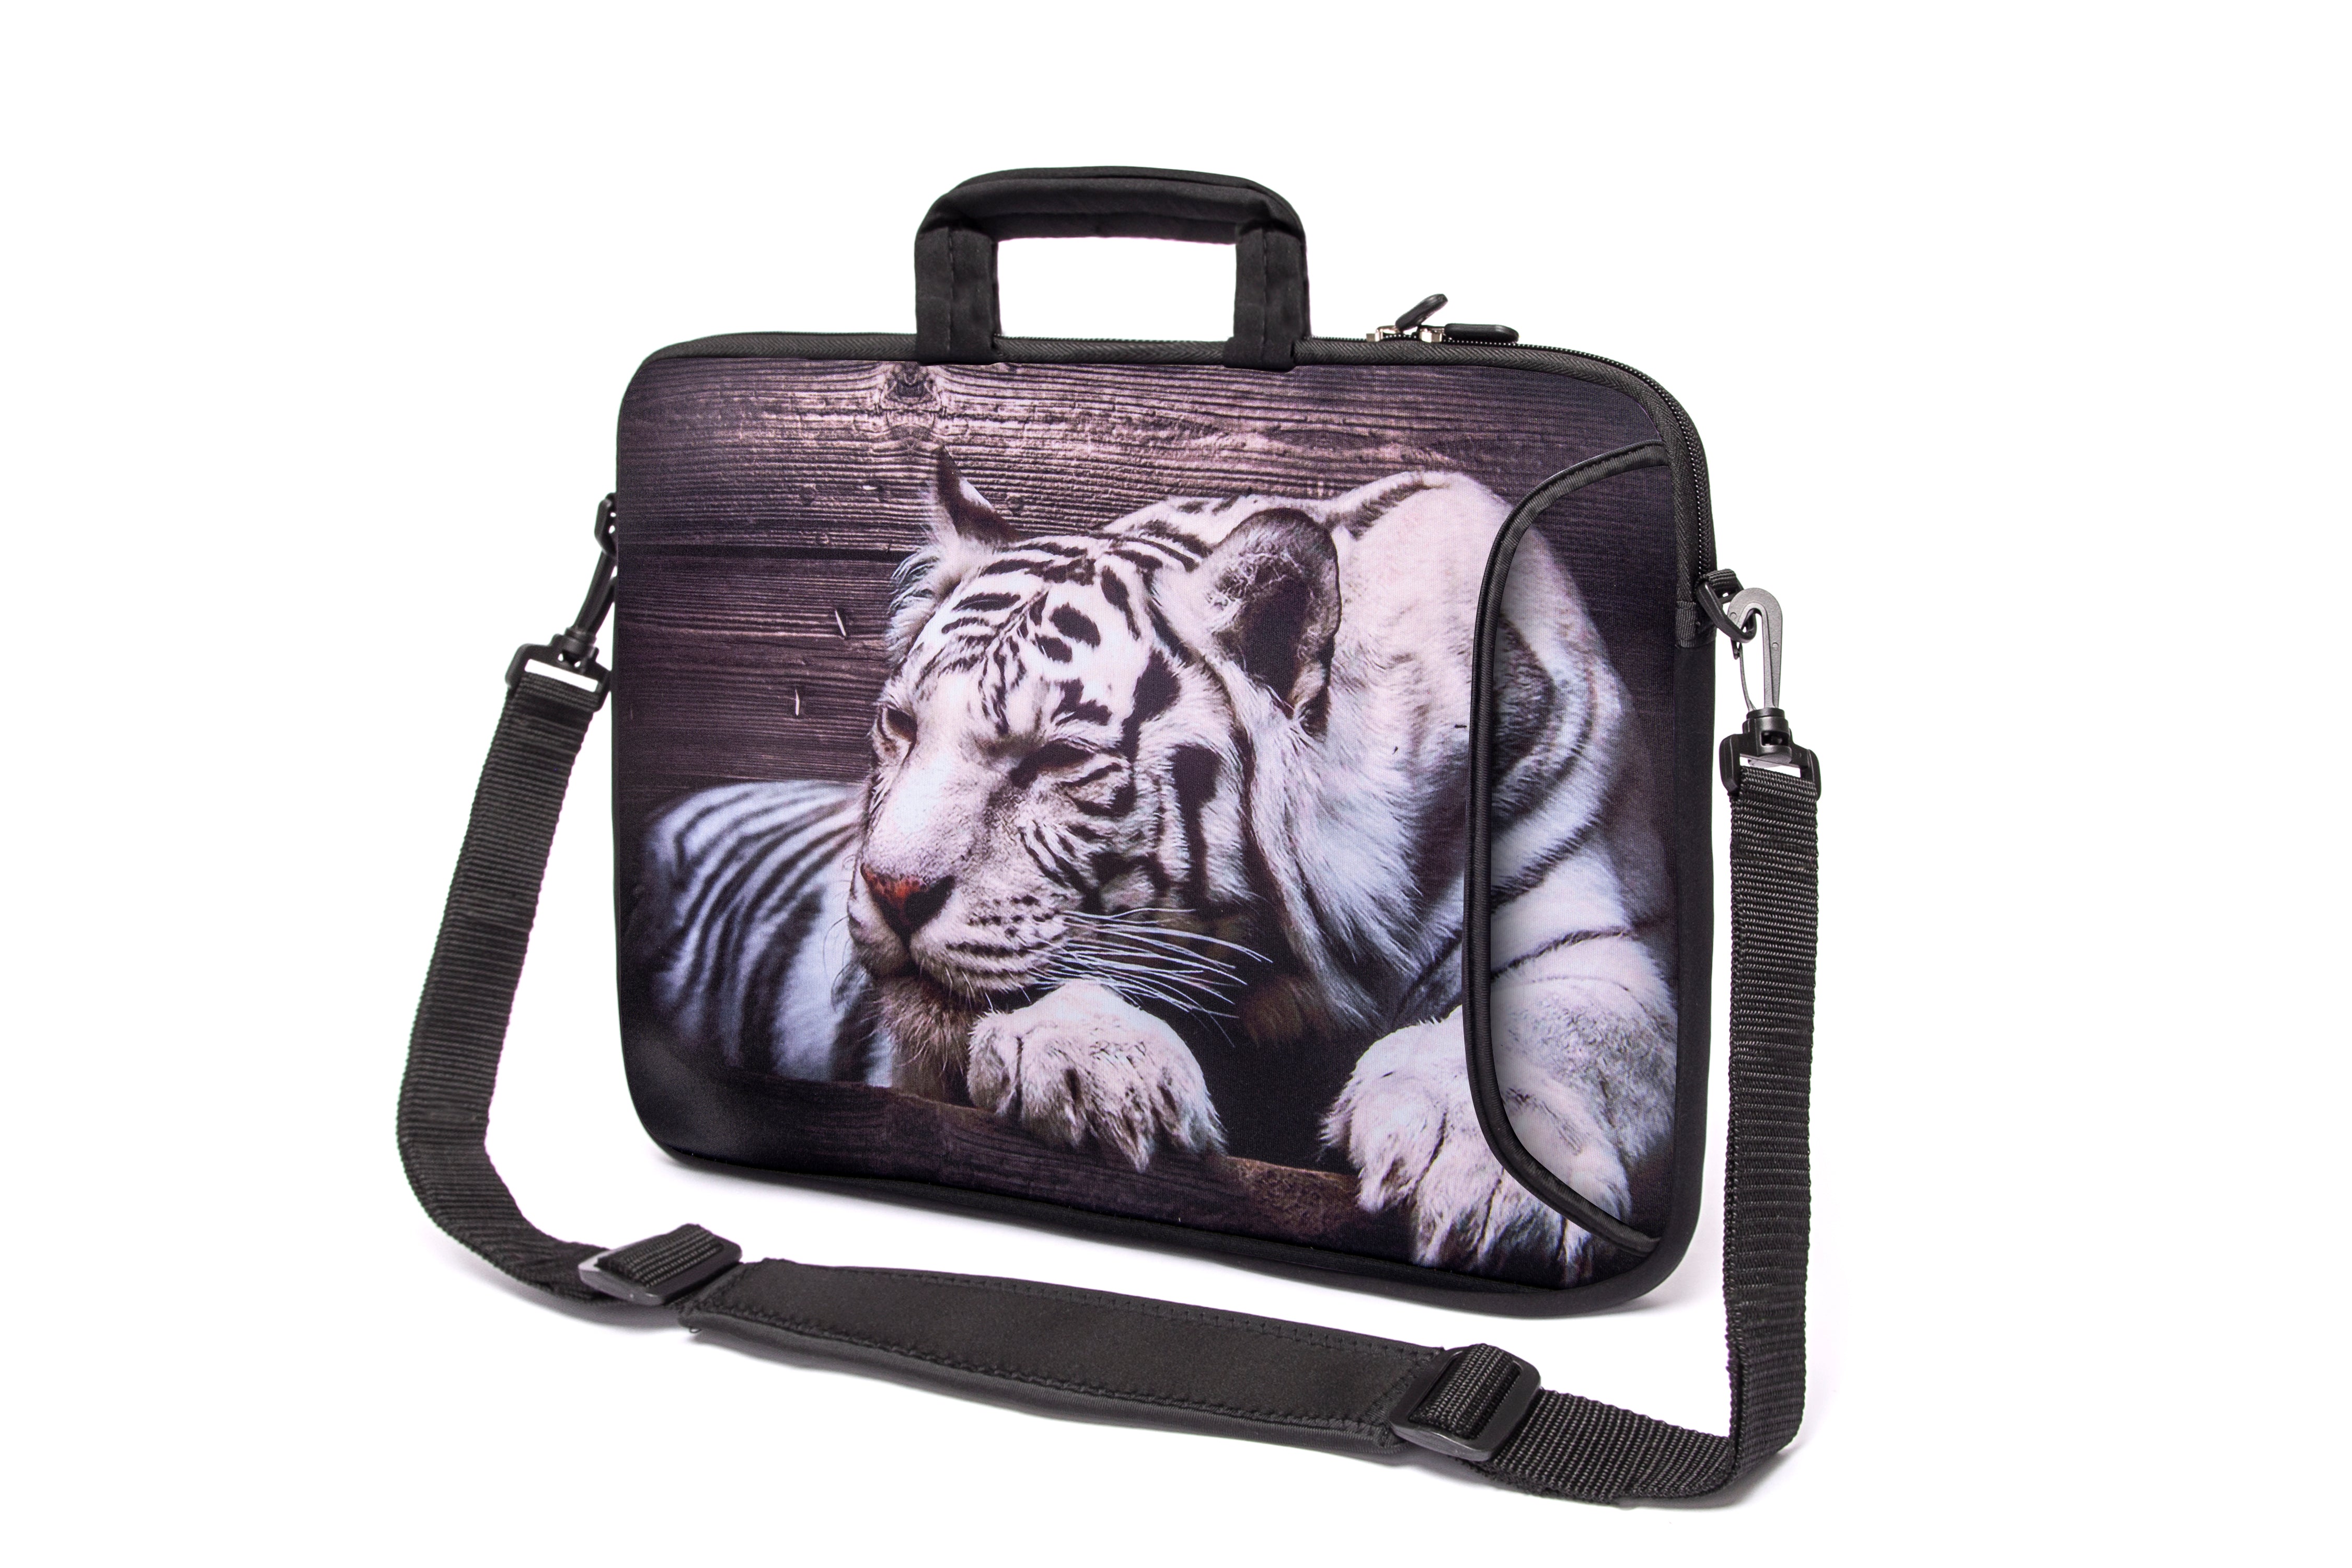 17"- 17.3" (inch) LAPTOP BAG/CASE WITH HANDLE & STRAP, NEOPRENE MADE FOR LAPTOPS/NOTEBOOKS, ZIPPED*SLEEPING TIGER*